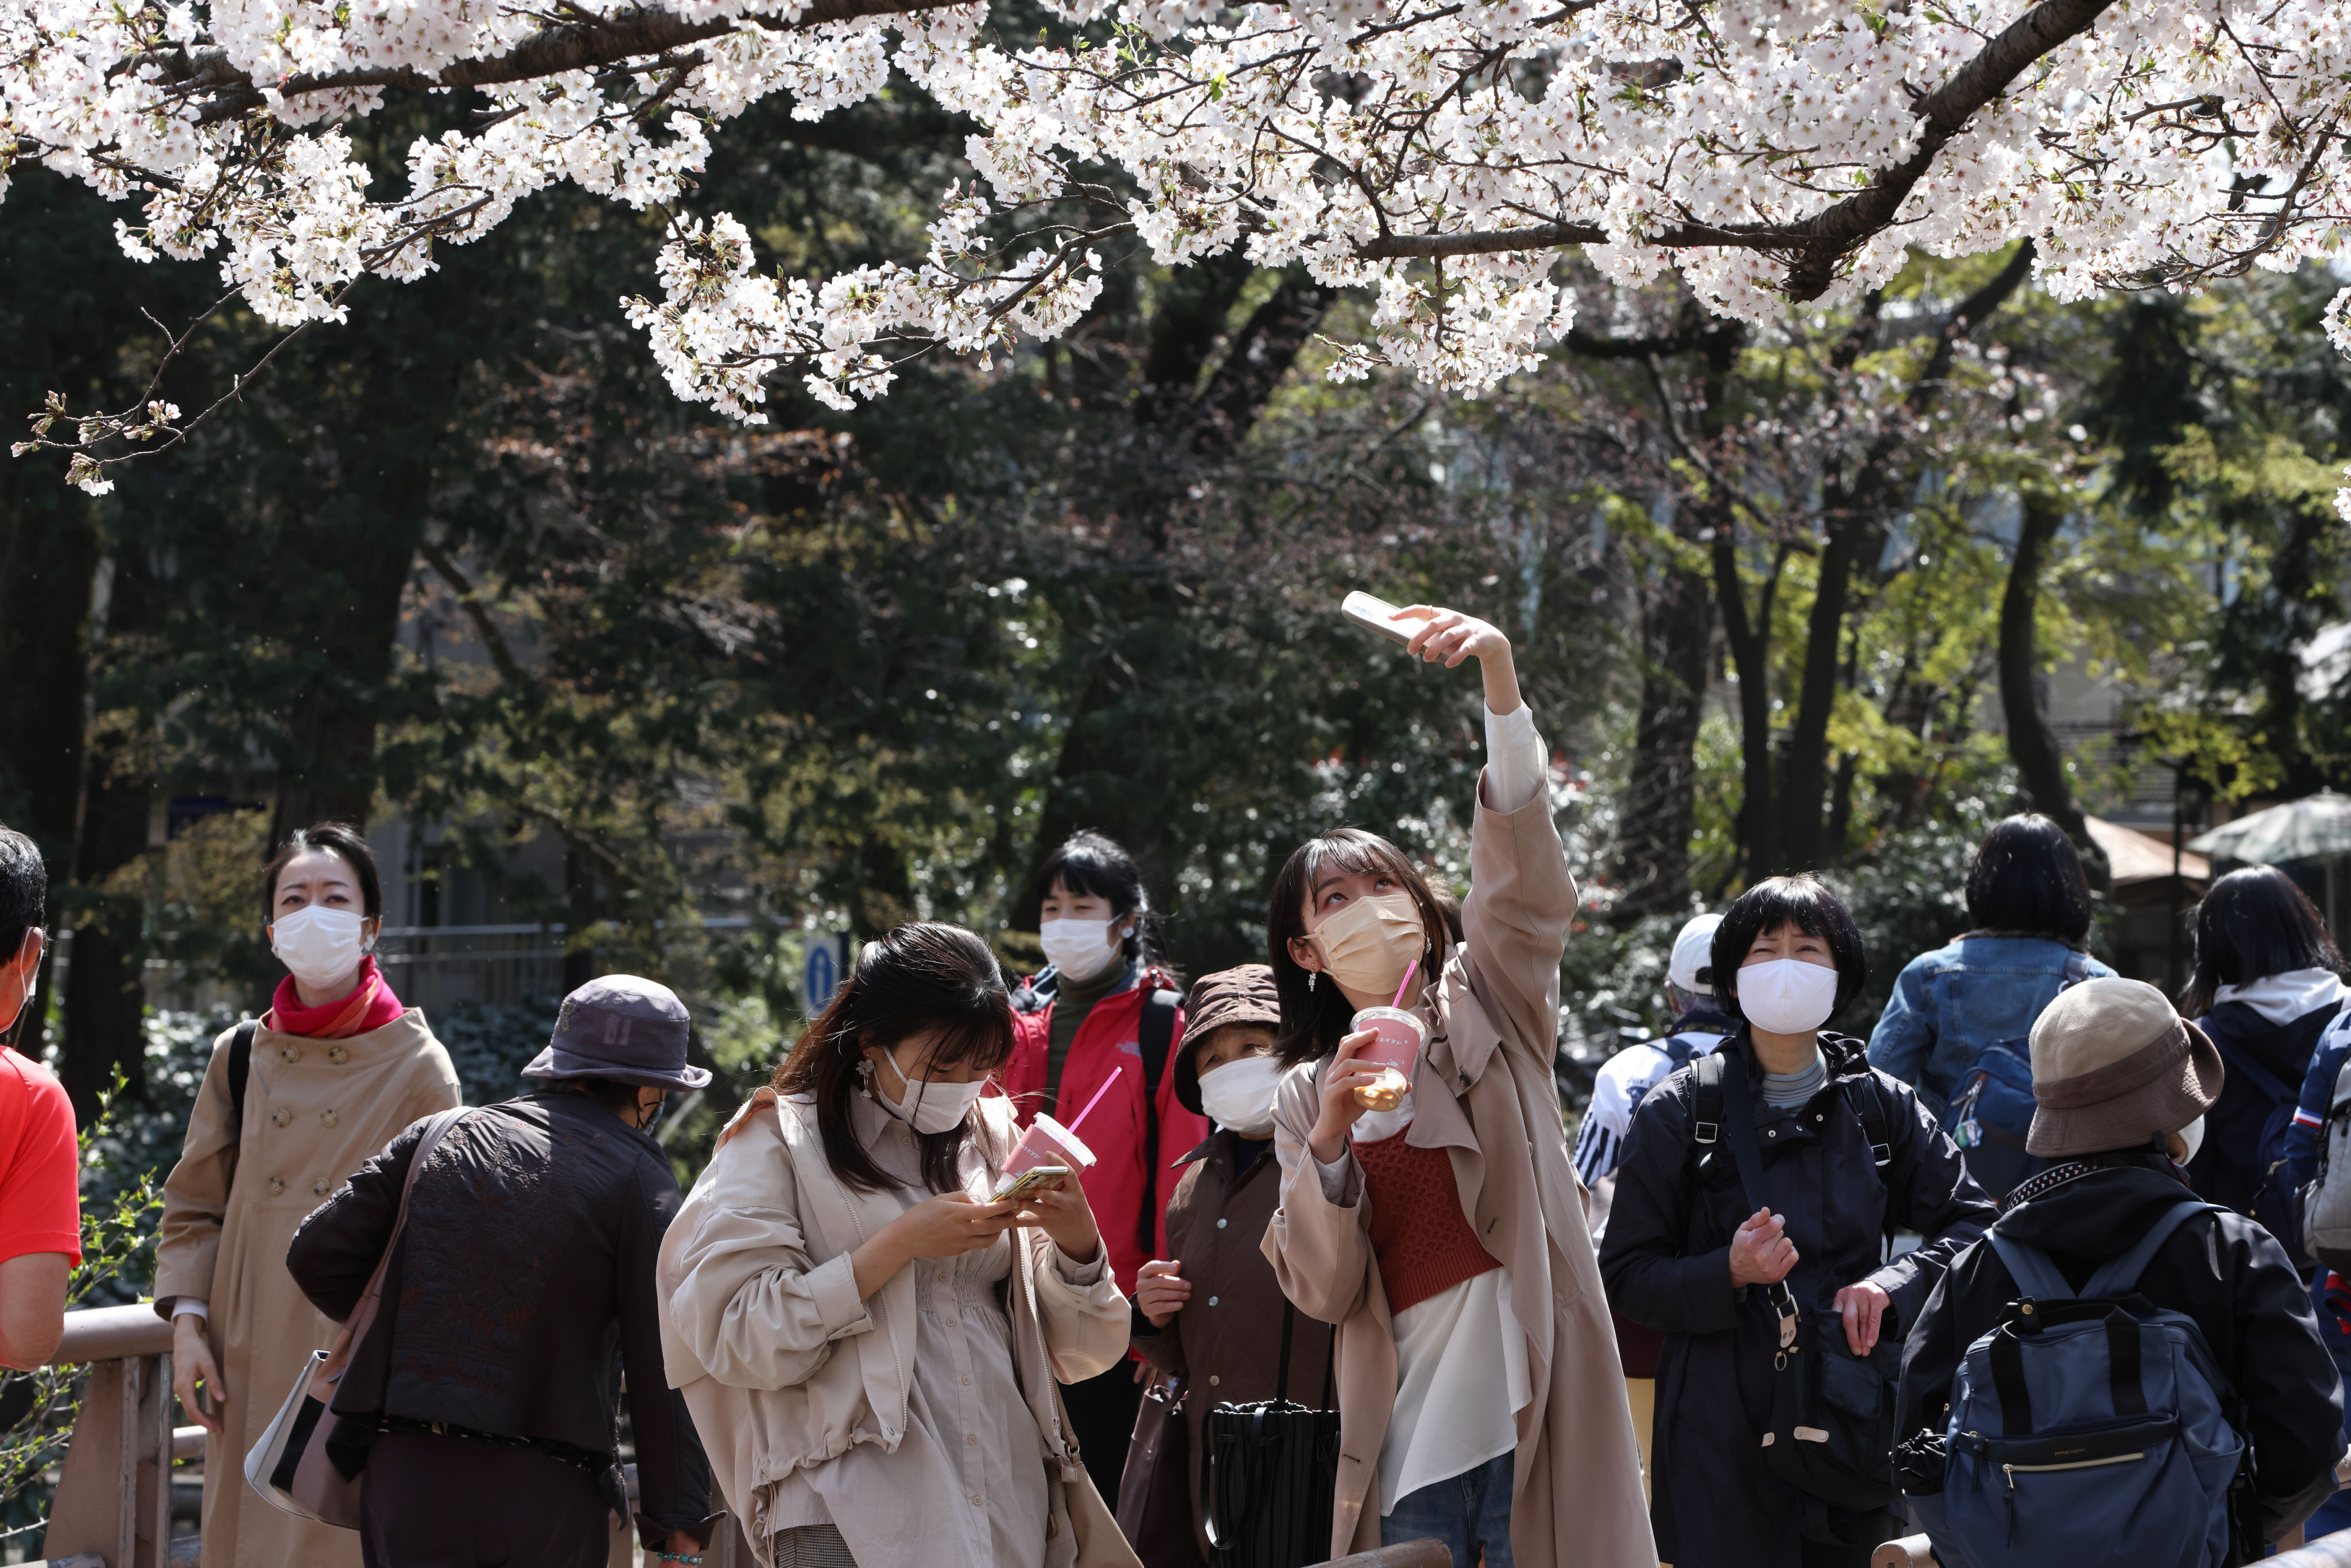 A woman takes a photo of cherry blossoms inside Inokashira Park, in western Tokyo, Japan, on March 26. Experts predict Asia-Pacific destinations will play a big part in travel for Chinese and East Asian tourists immediately after Covid-19. Photo: Getty Images